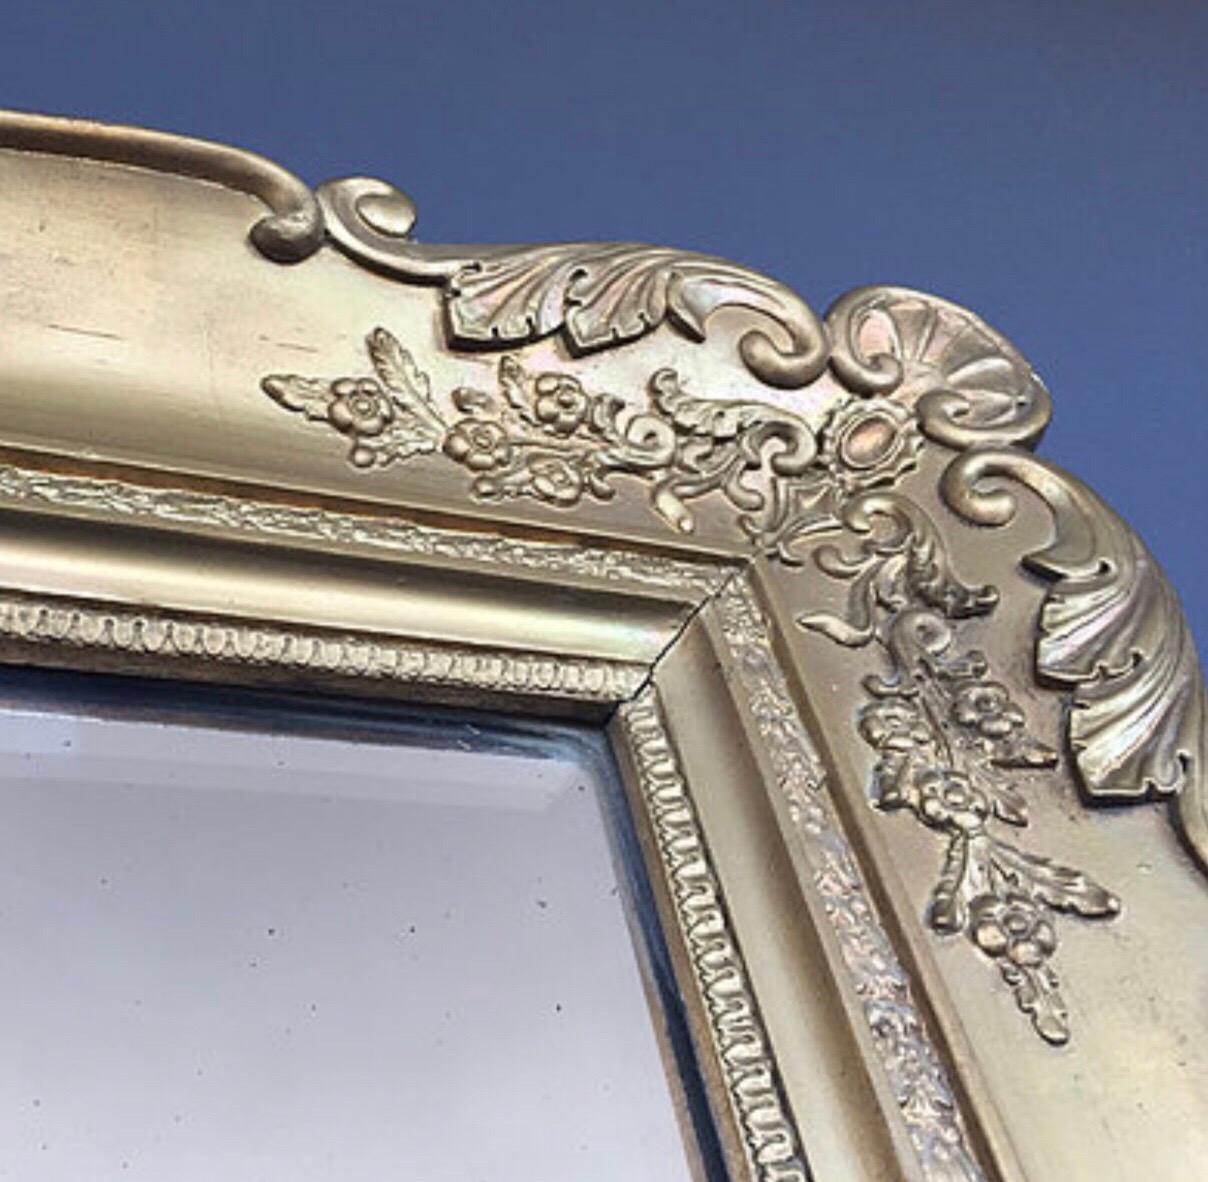 Grand Antique French Baroque Mirror, early 1800s (Barock)